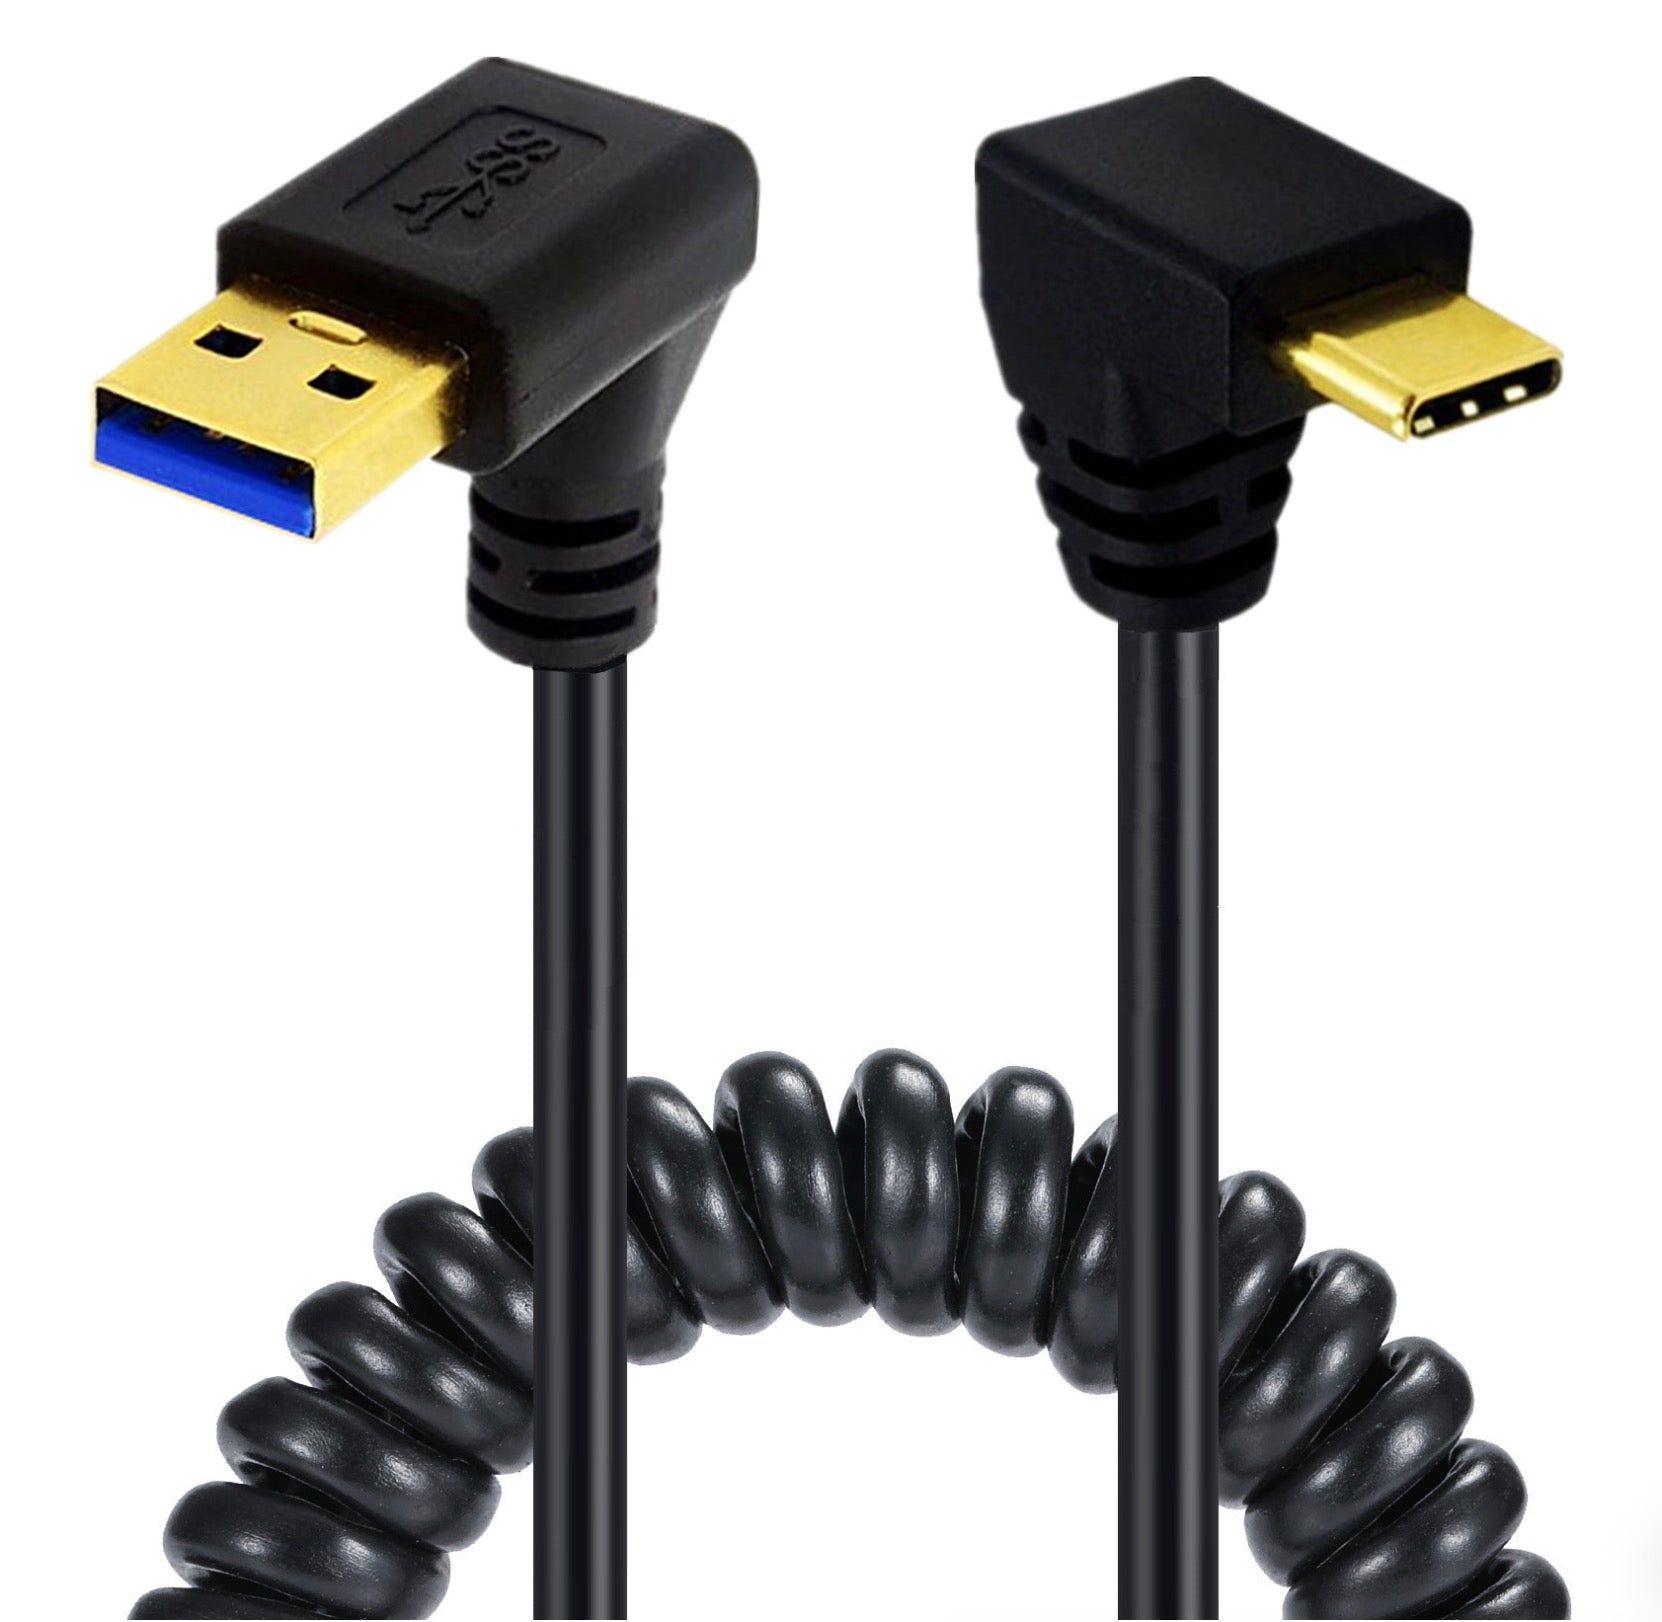 USB C Type-C Male to USB 3.0 A Male Coiled Cable - Down Angle